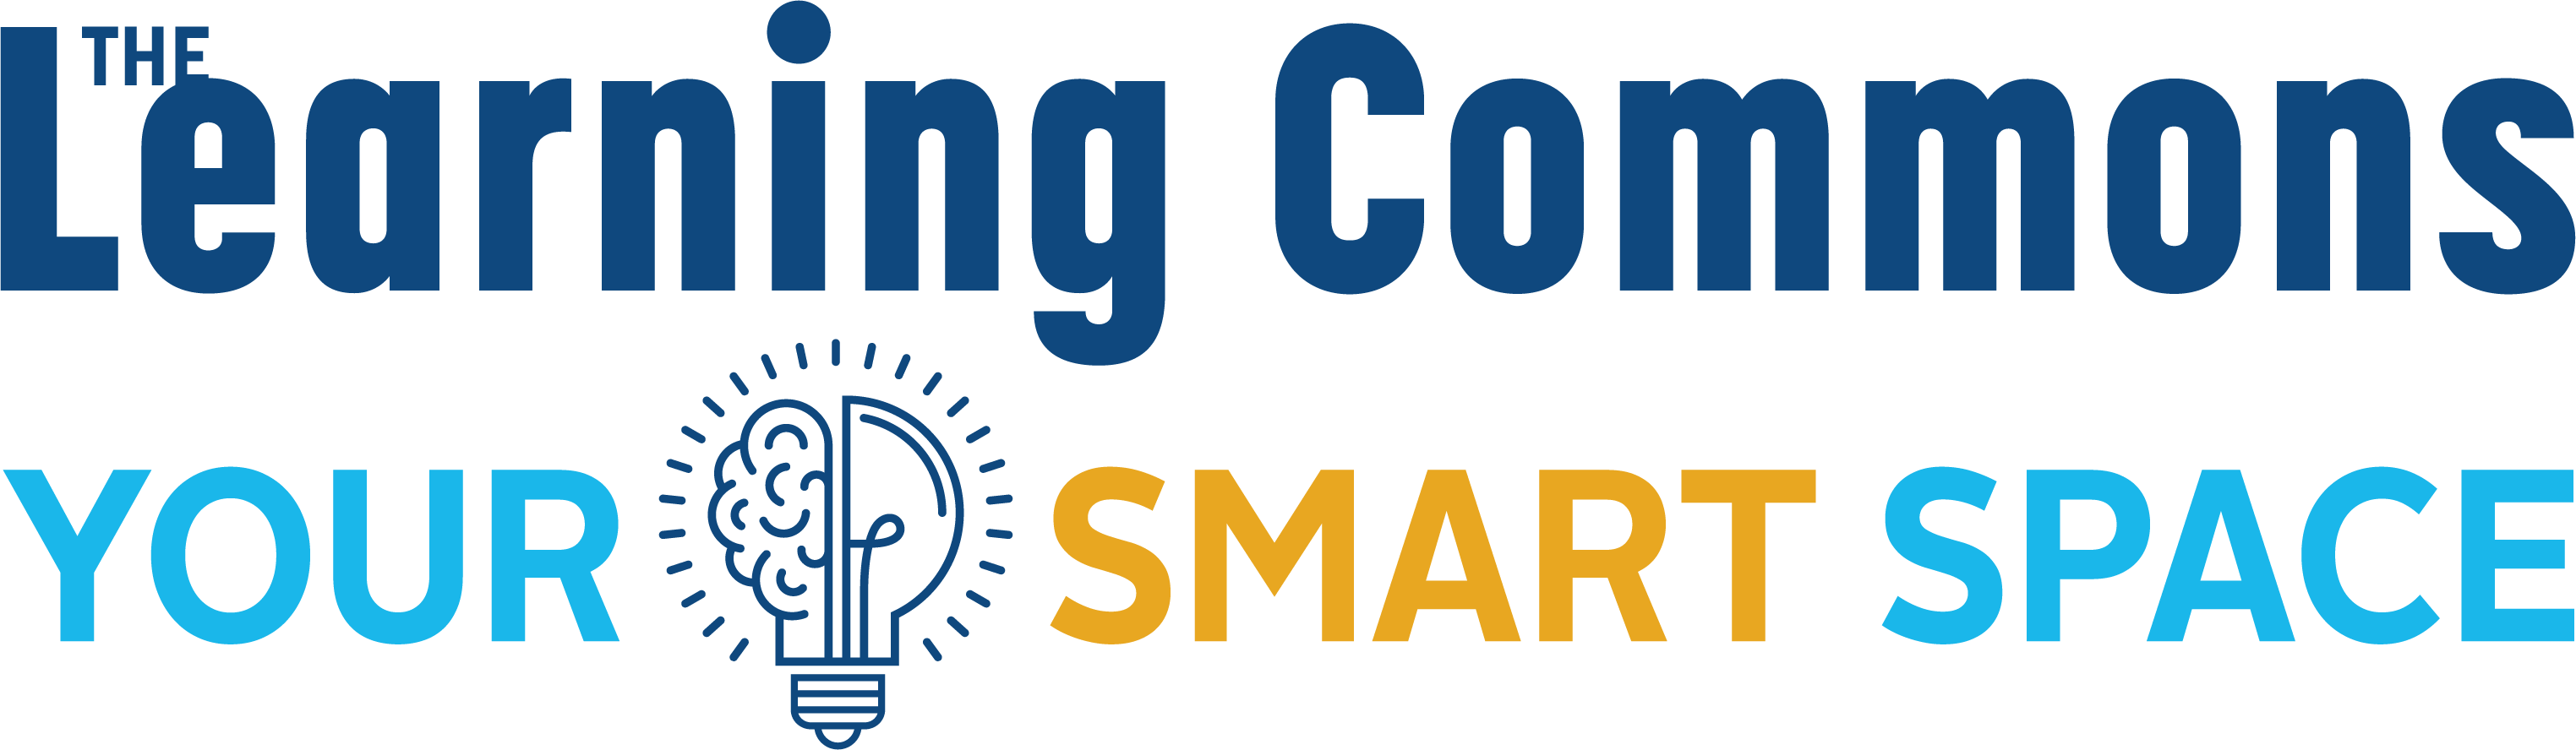 Learning commons logo